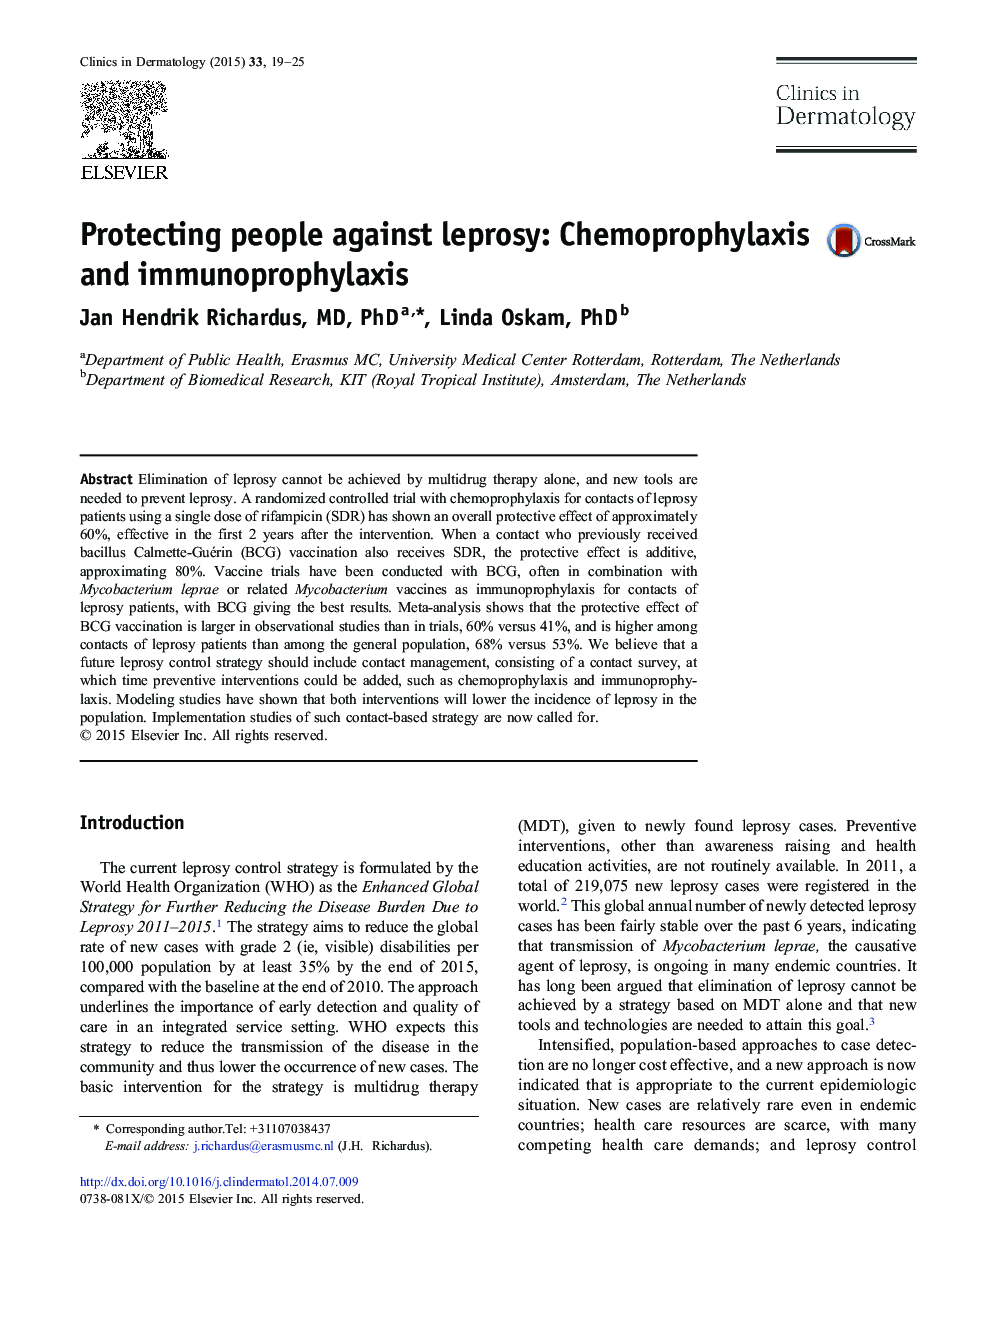 Protecting people against leprosy: Chemoprophylaxis and immunoprophylaxis